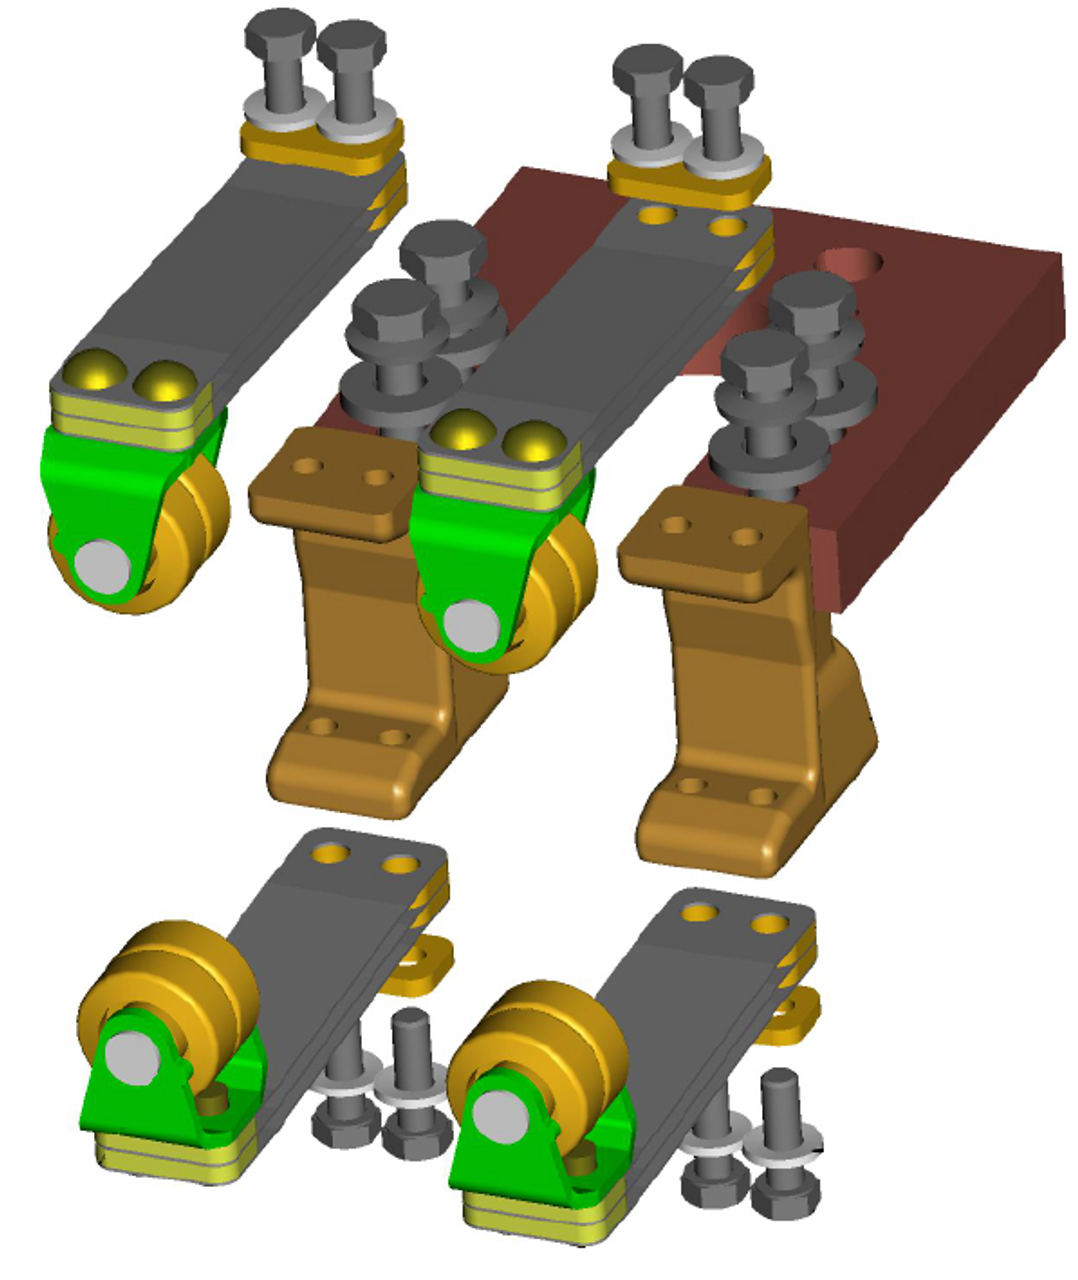 3D exploded view of part